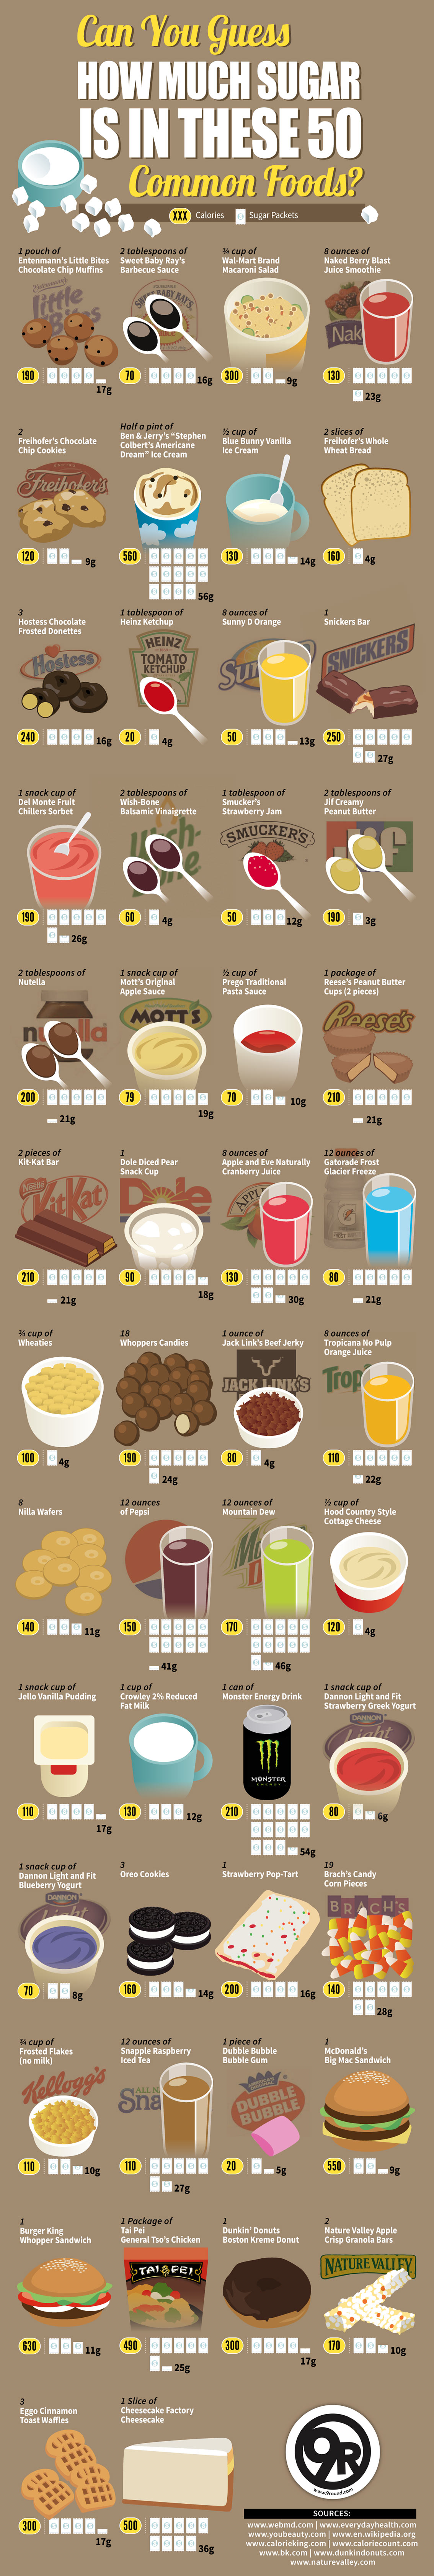 Amount of Sugar Content in Common Foods Chart